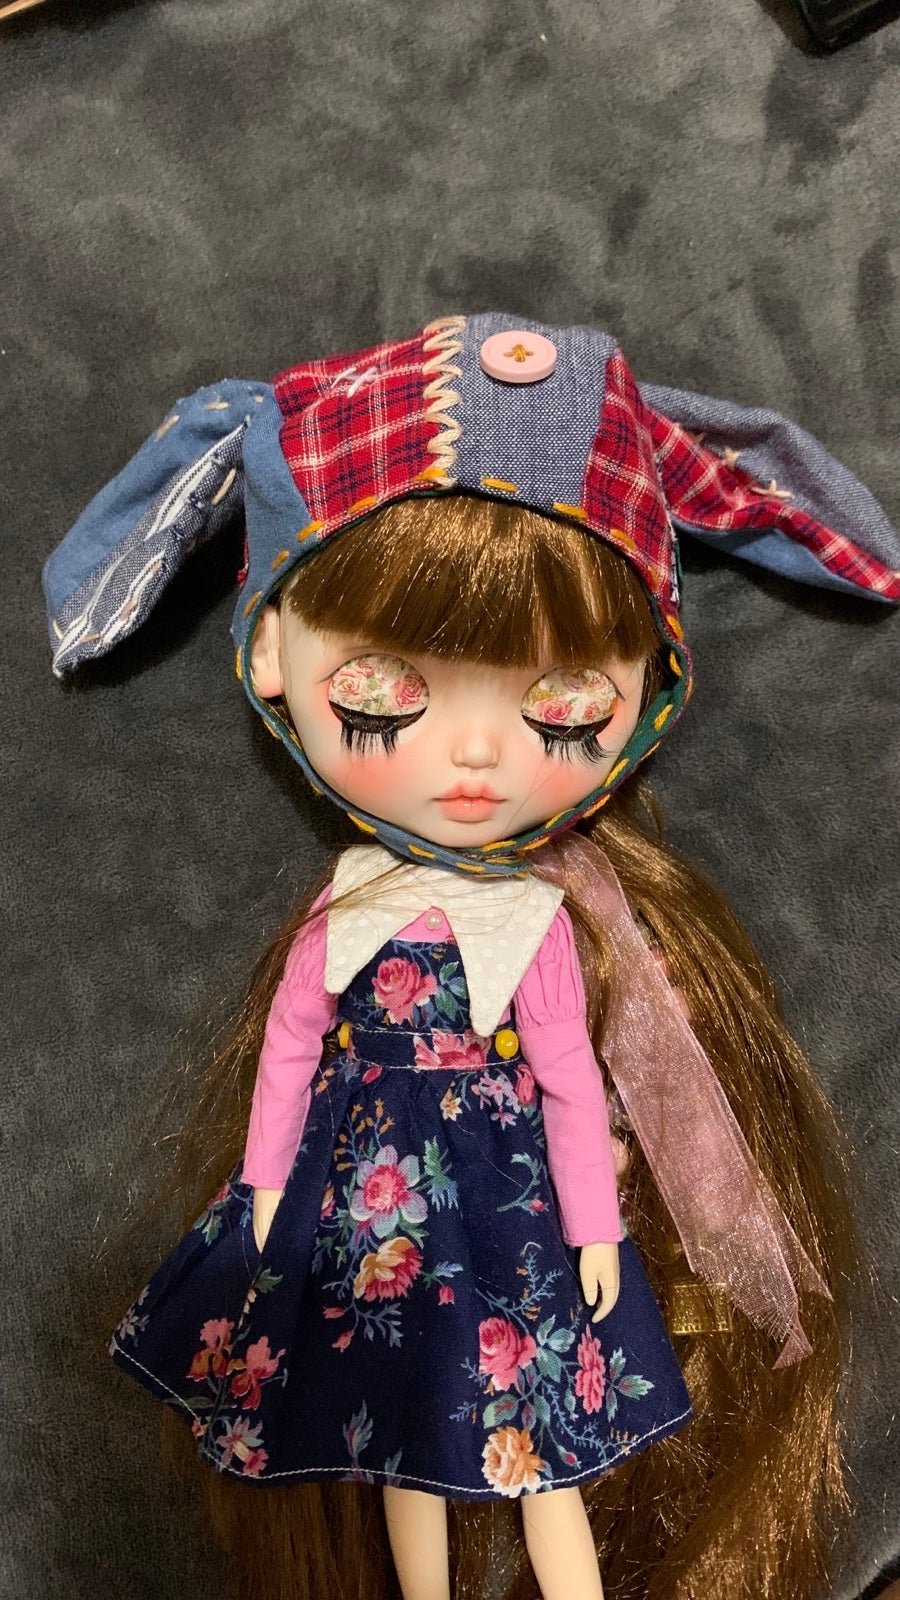 Blythe Doll Bunny Hat Doll not Included I5DwfU51m